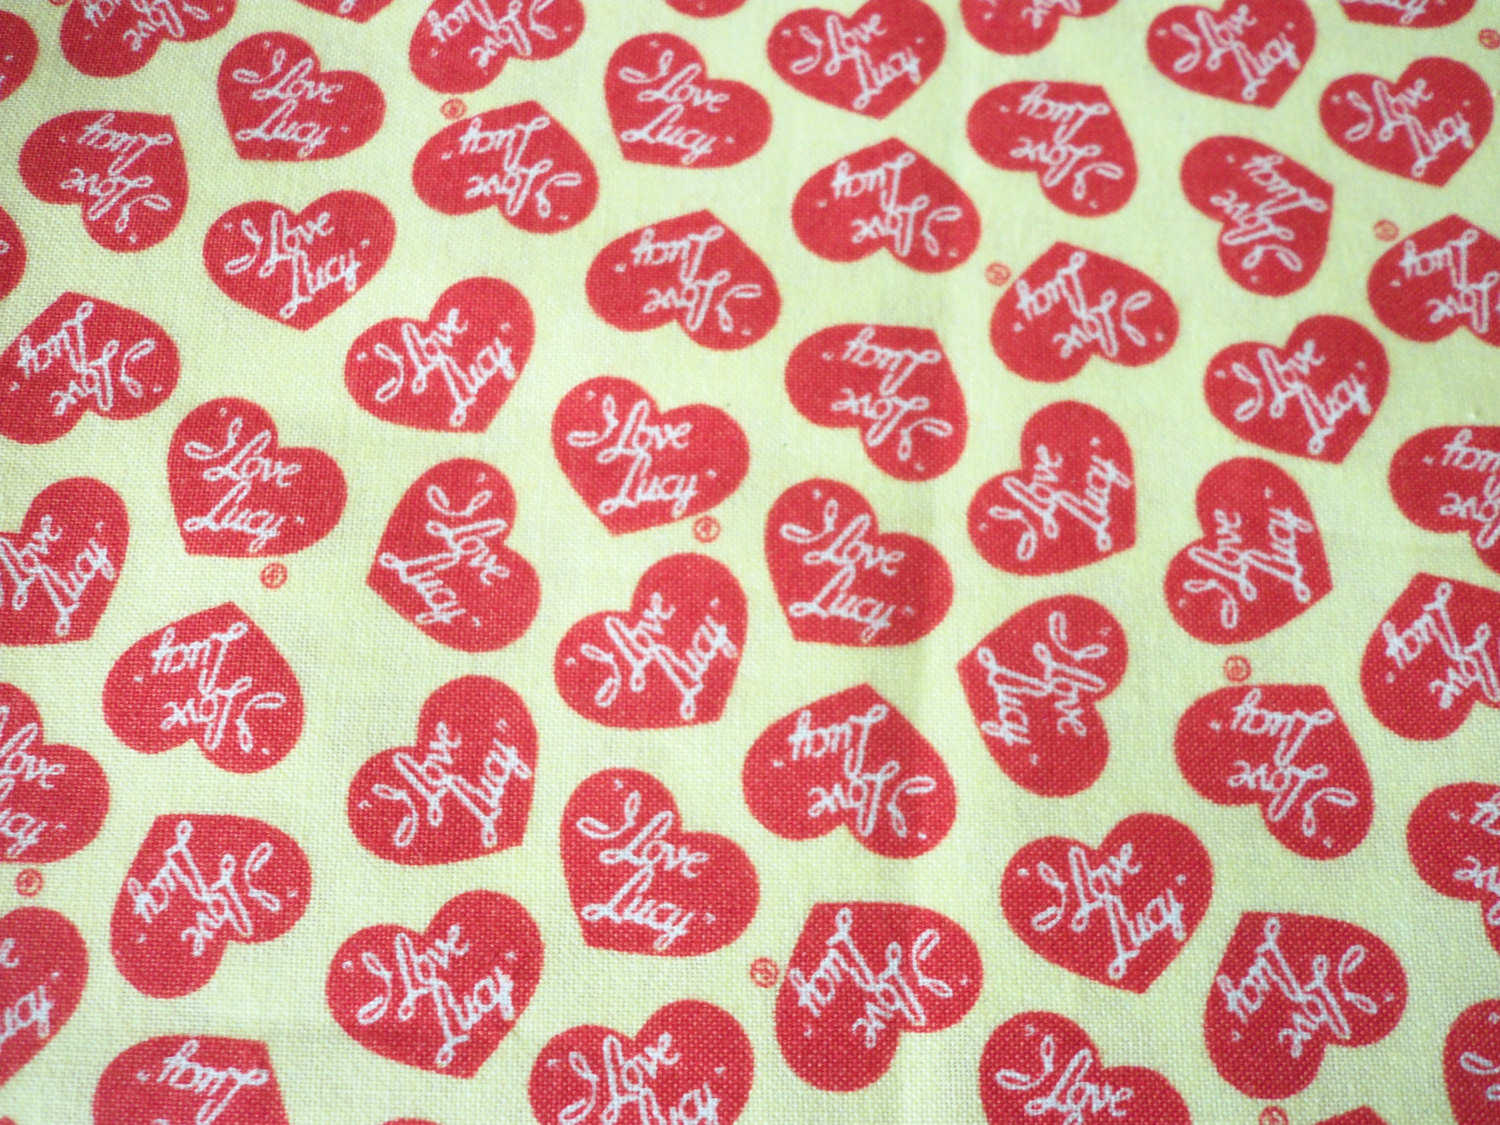 I Love Lucy Fabric Yellow Background Red Hearts Rare By